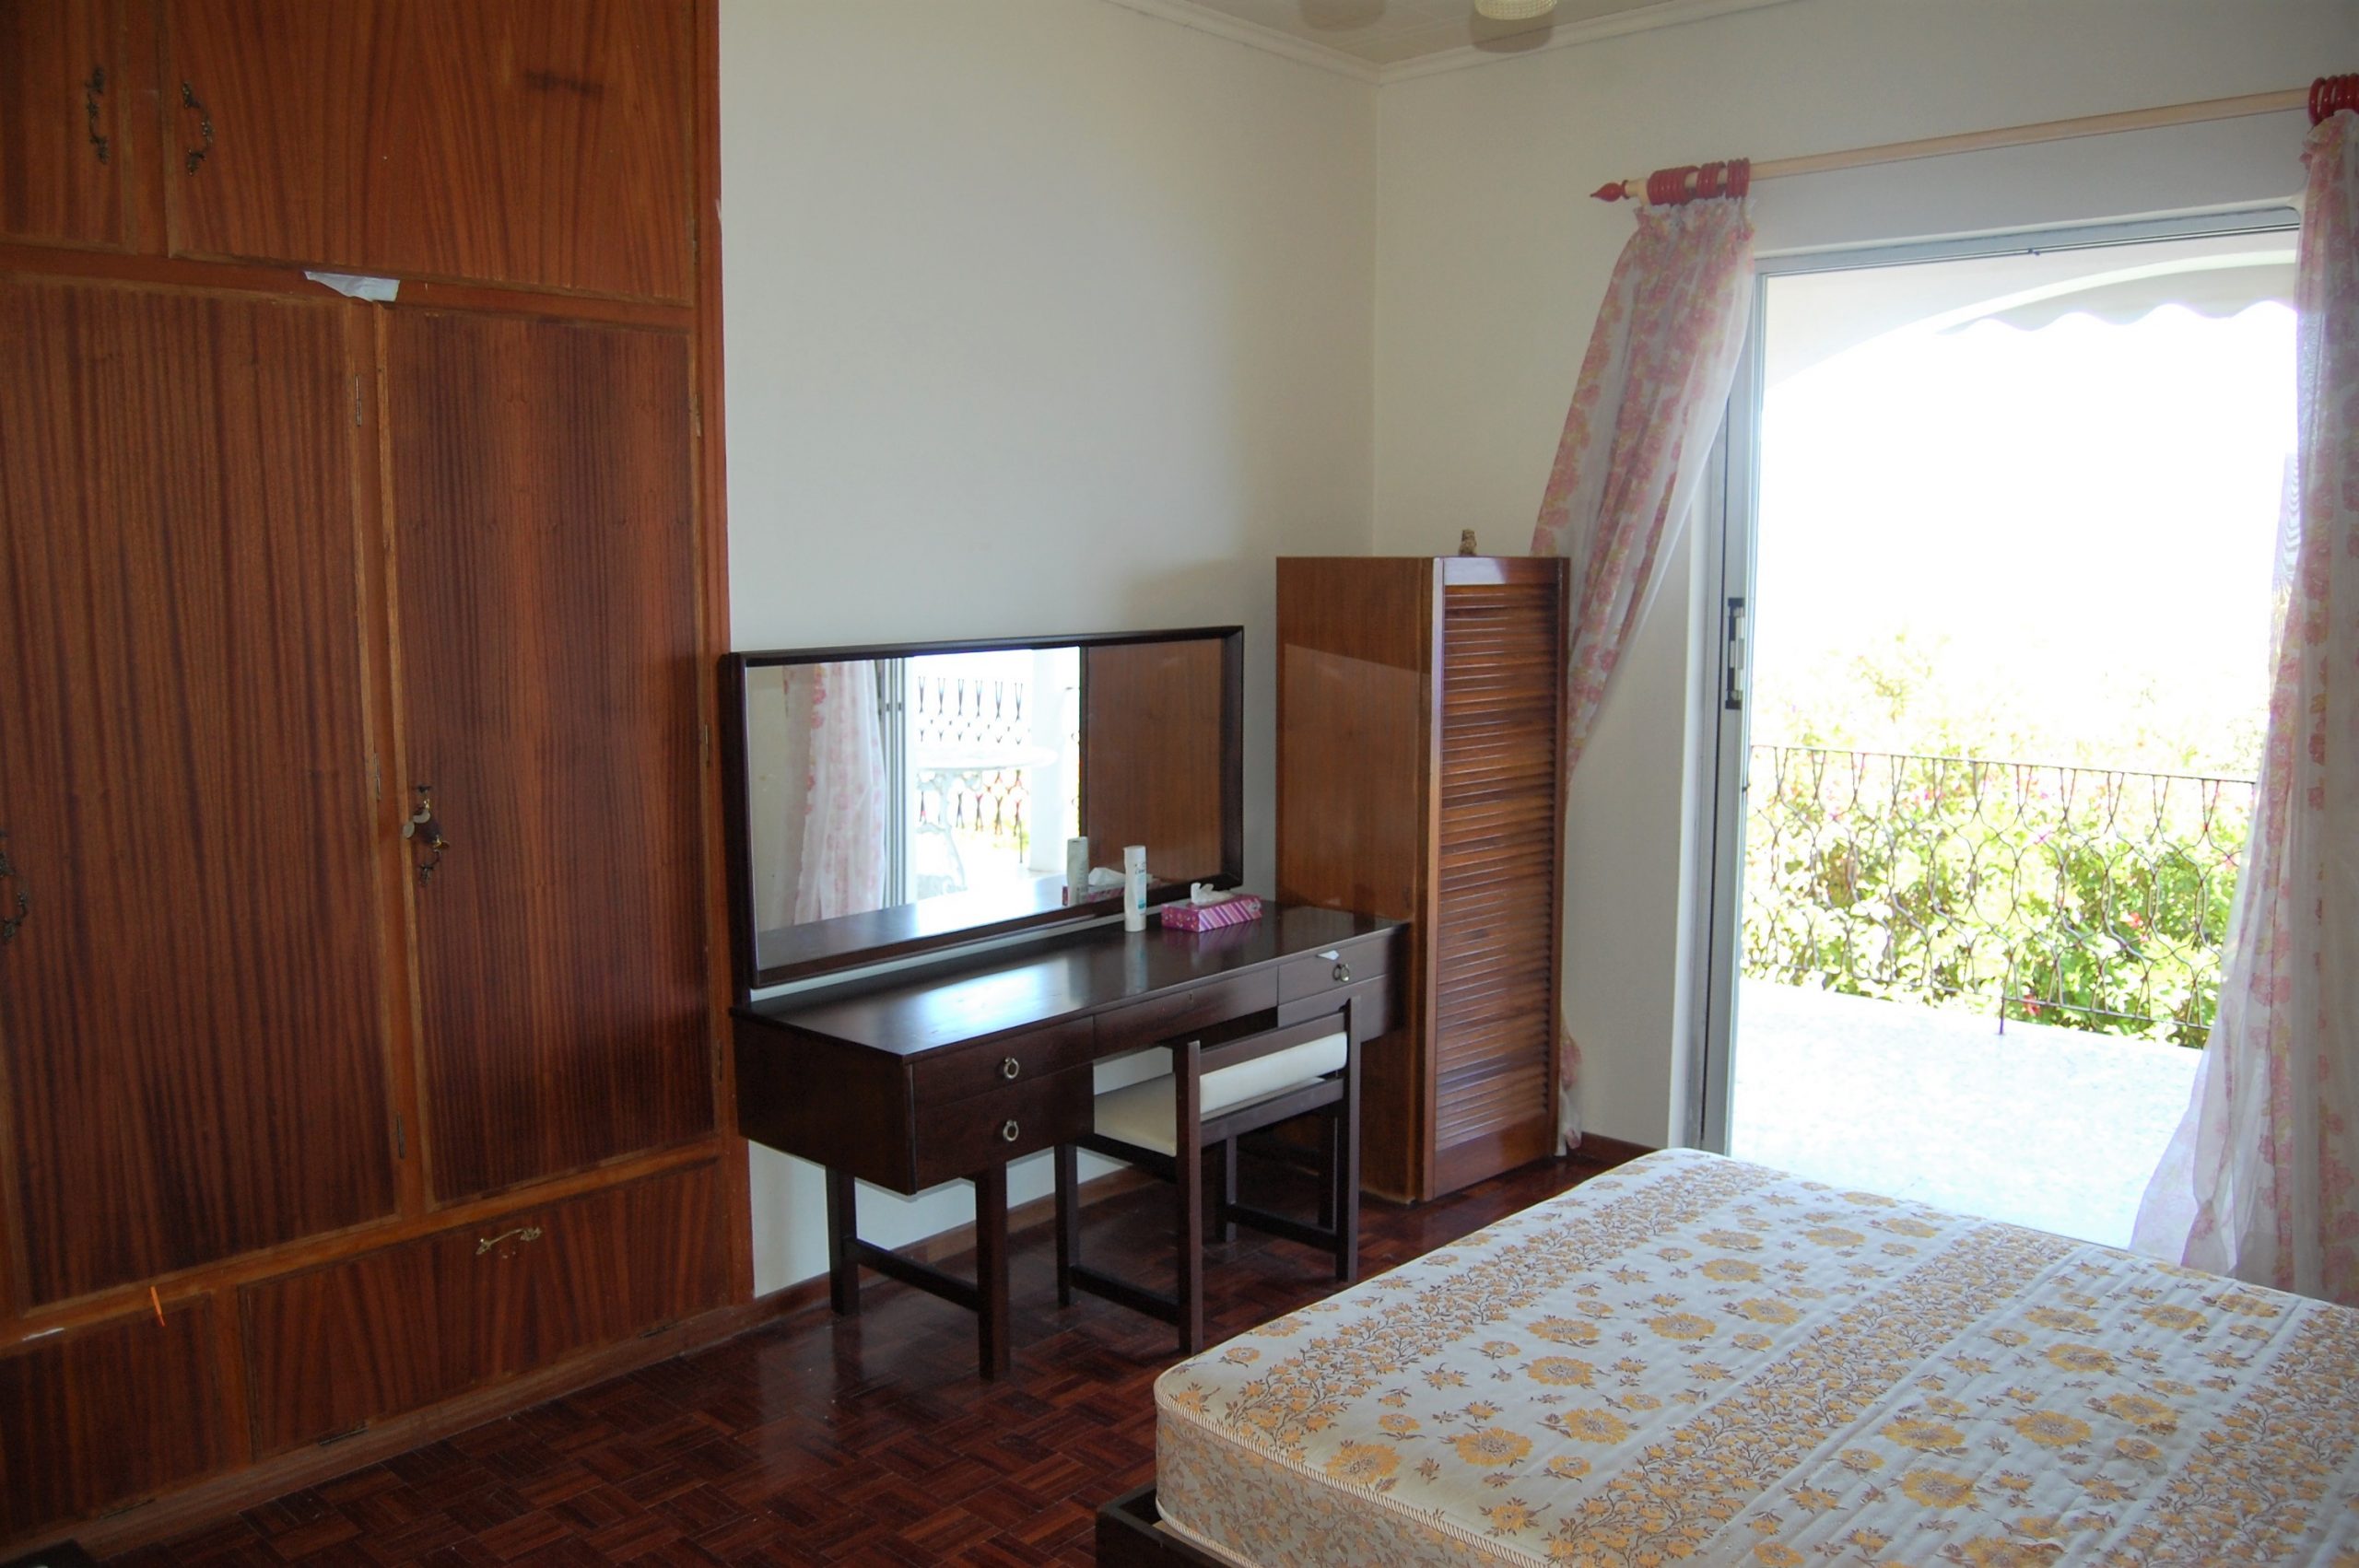 Bedroom of house for sale in Ithaca Greece Lefki